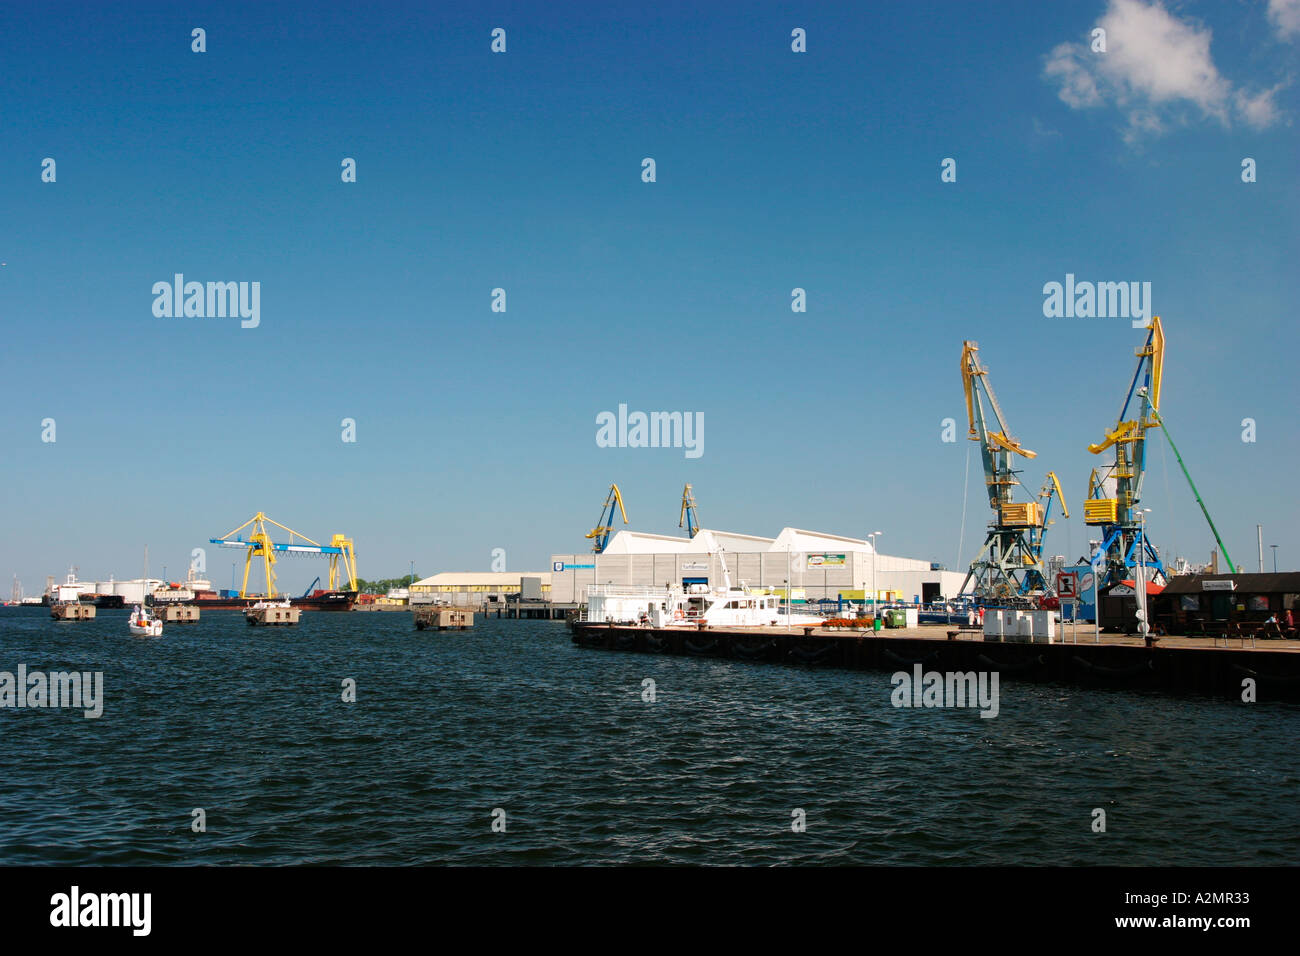 BRD Germany Mecklenburg Vorpommern Rostock at the Habour with Cargo Cranes Stock Photo